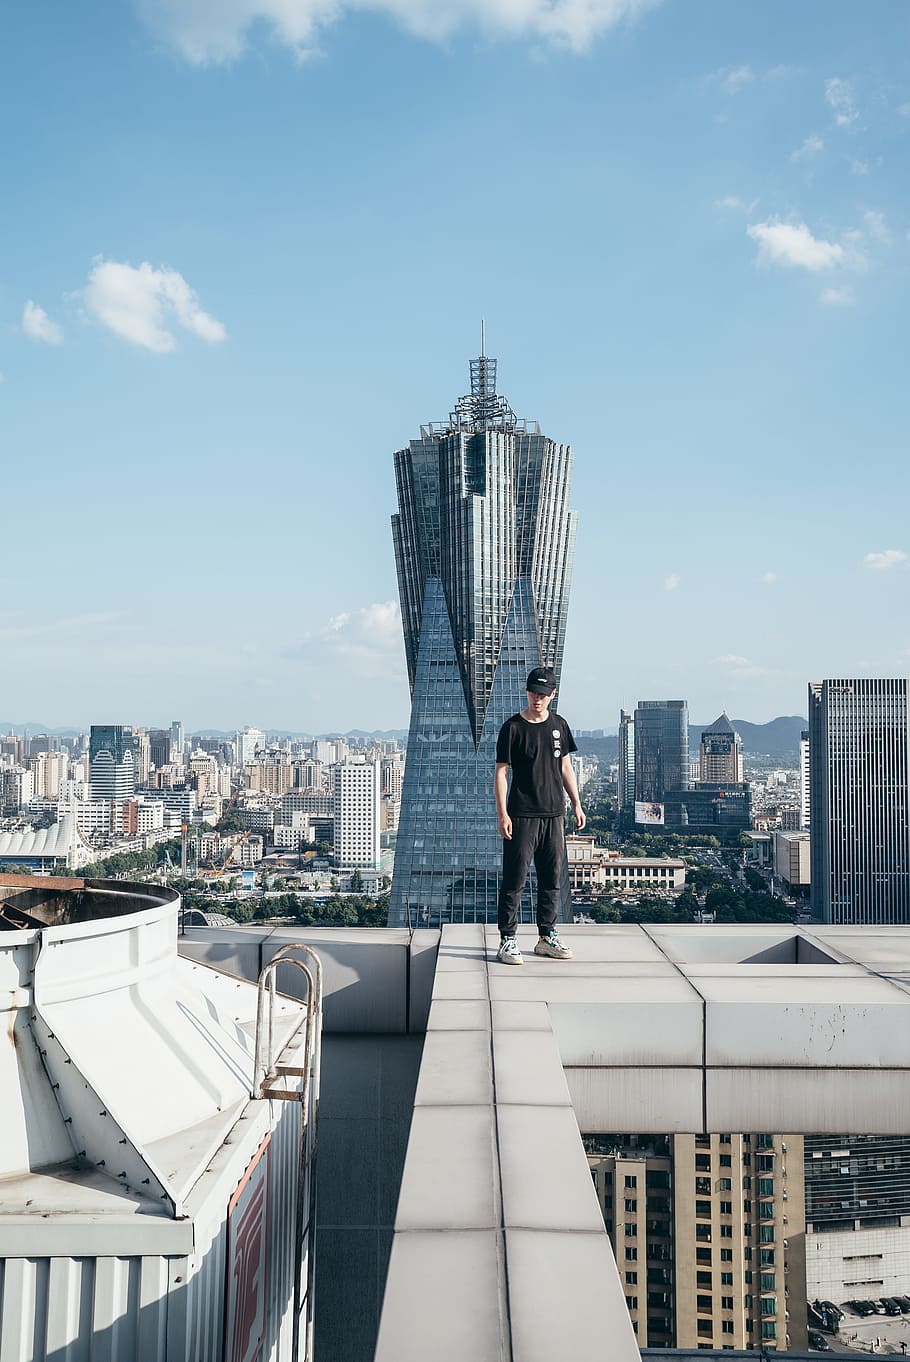 man standing on top of a building, city, person, roof, edge, cloud